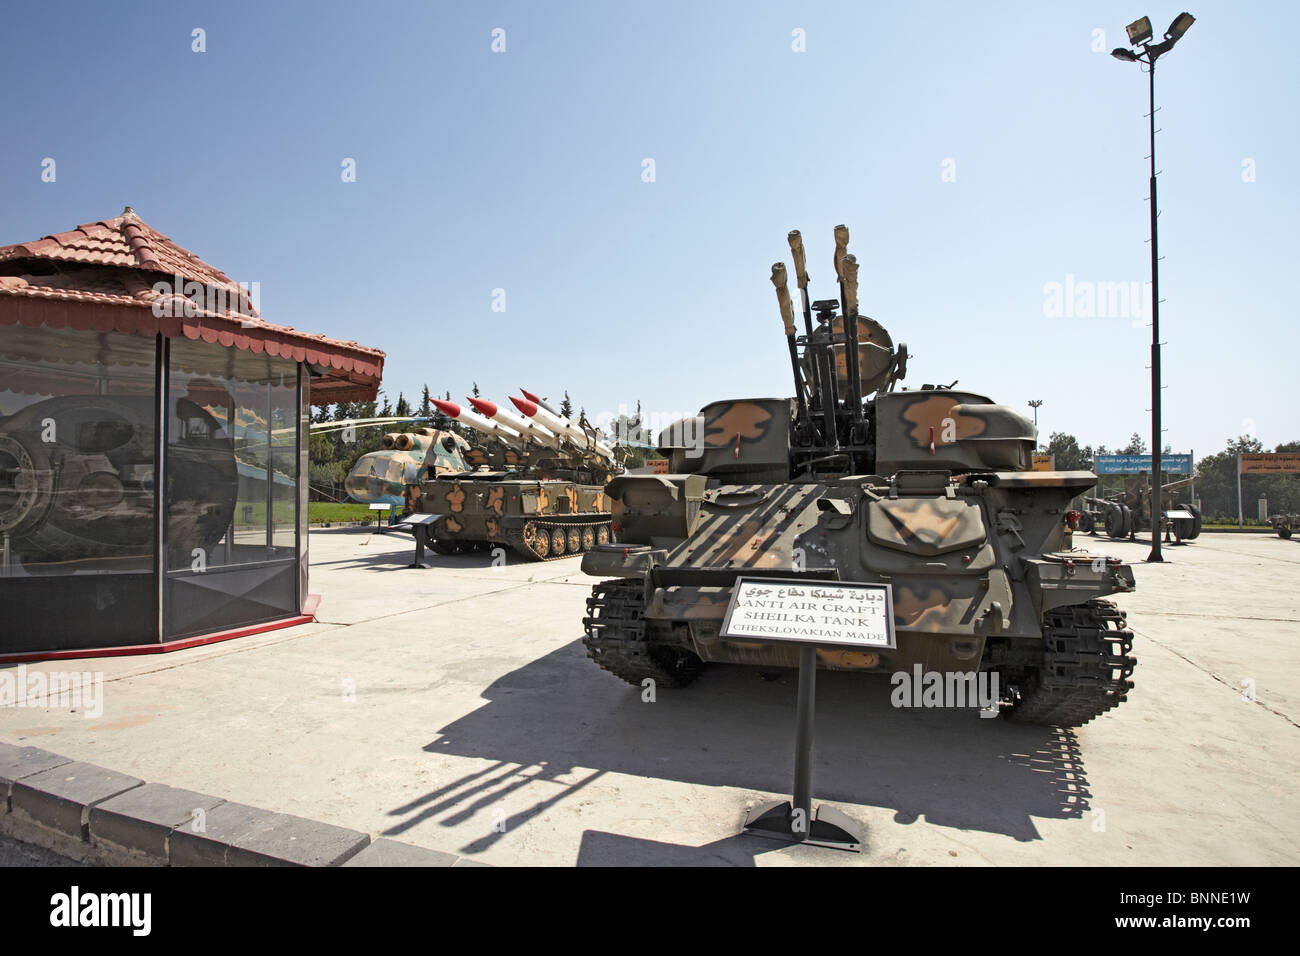 Damascus Syria Panorama military museum  commemorating the Yom Kippur or October war and the six days war with a Sheilka tank an SAM missile systems Stock Photo